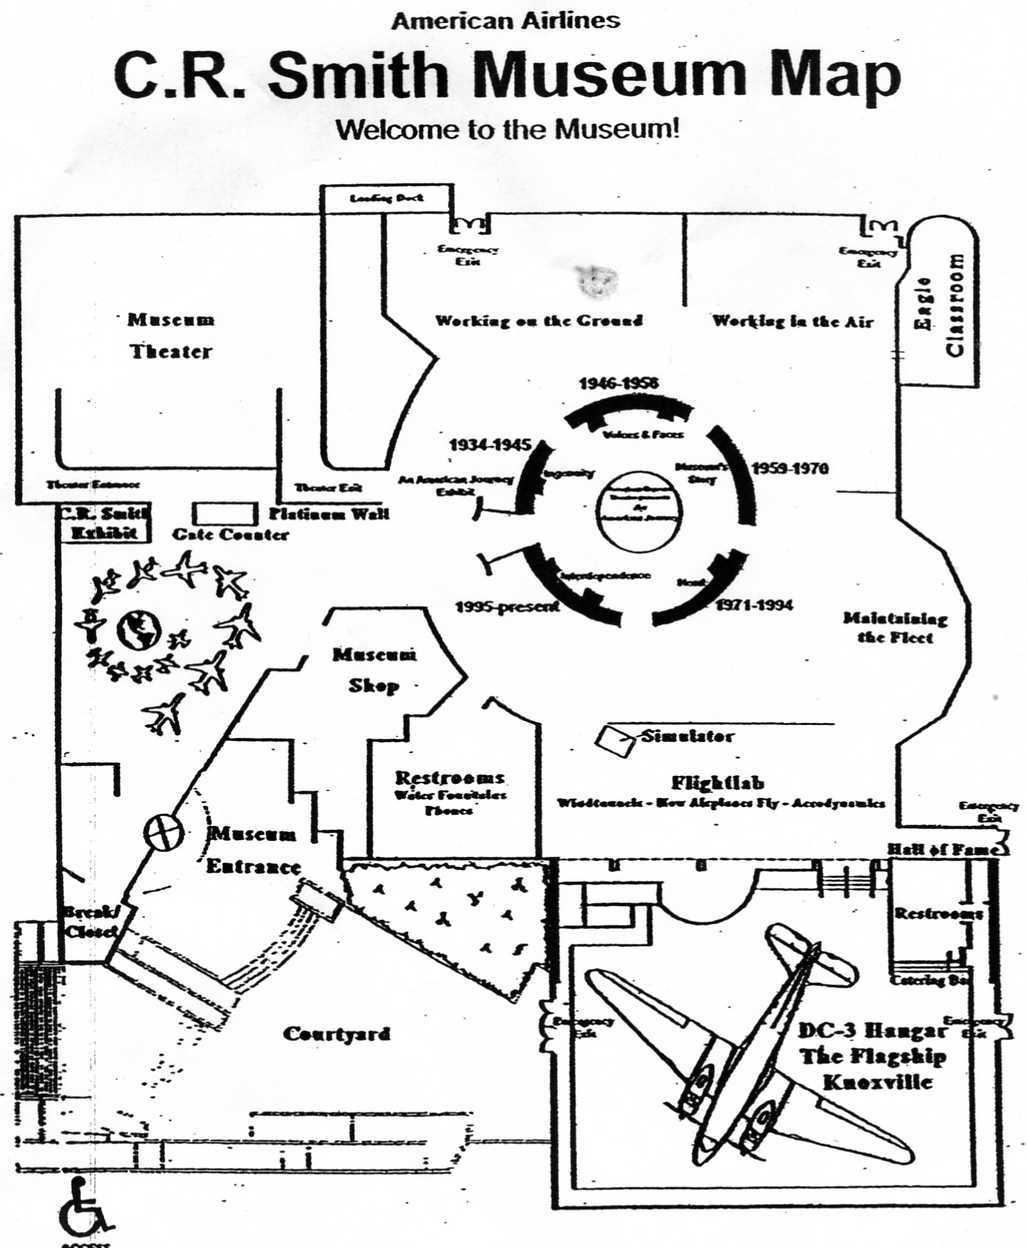 American Airlines C.R. Smith Museum Map